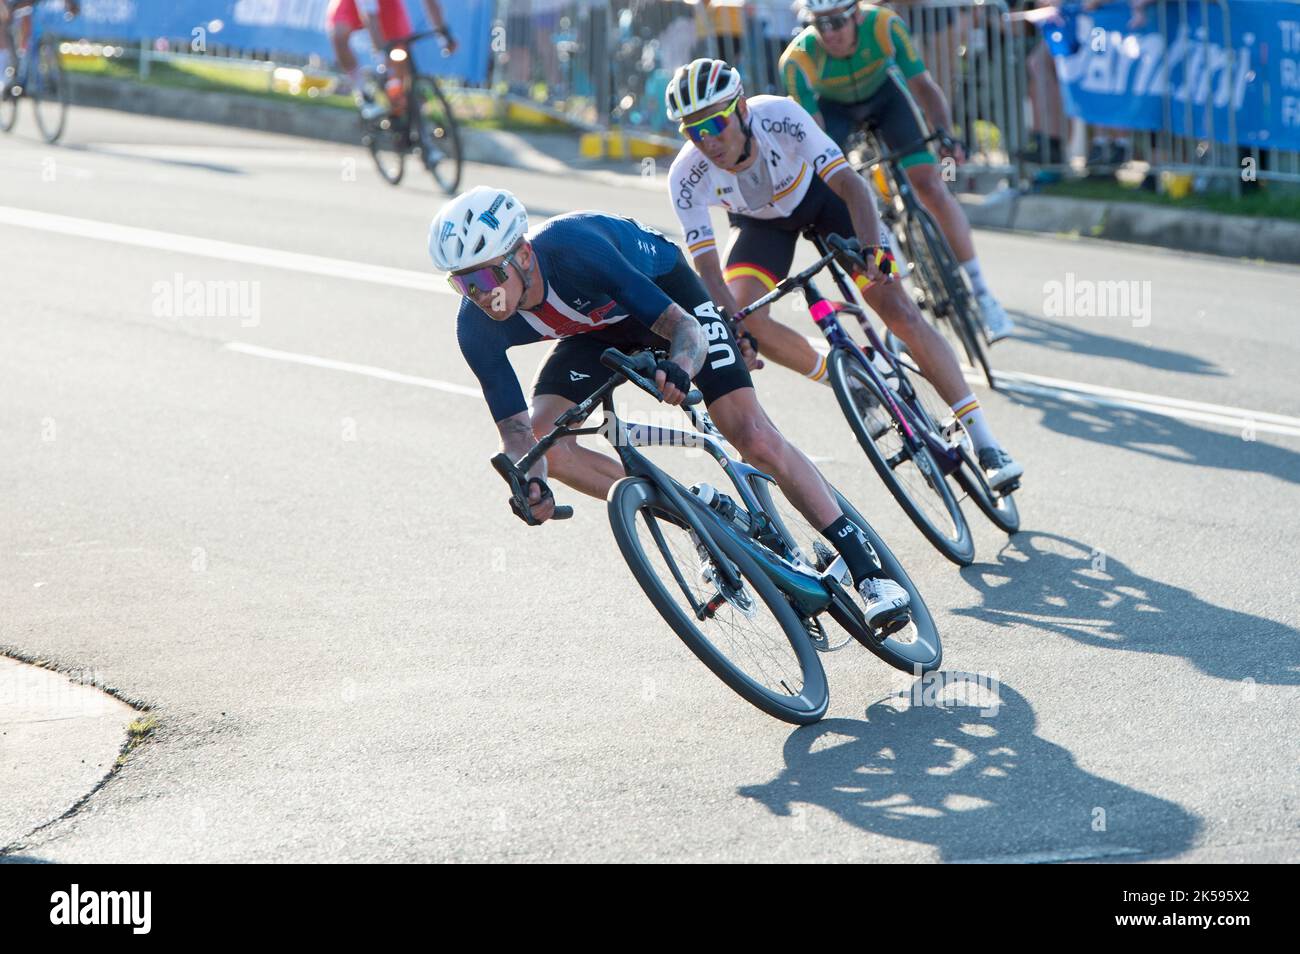 Top US gravel rider Keegan Swenson competes in his first road cycling world championship at the 2022 UCI Road Cycling Worlds in Wollongong, Australia. Stock Photo